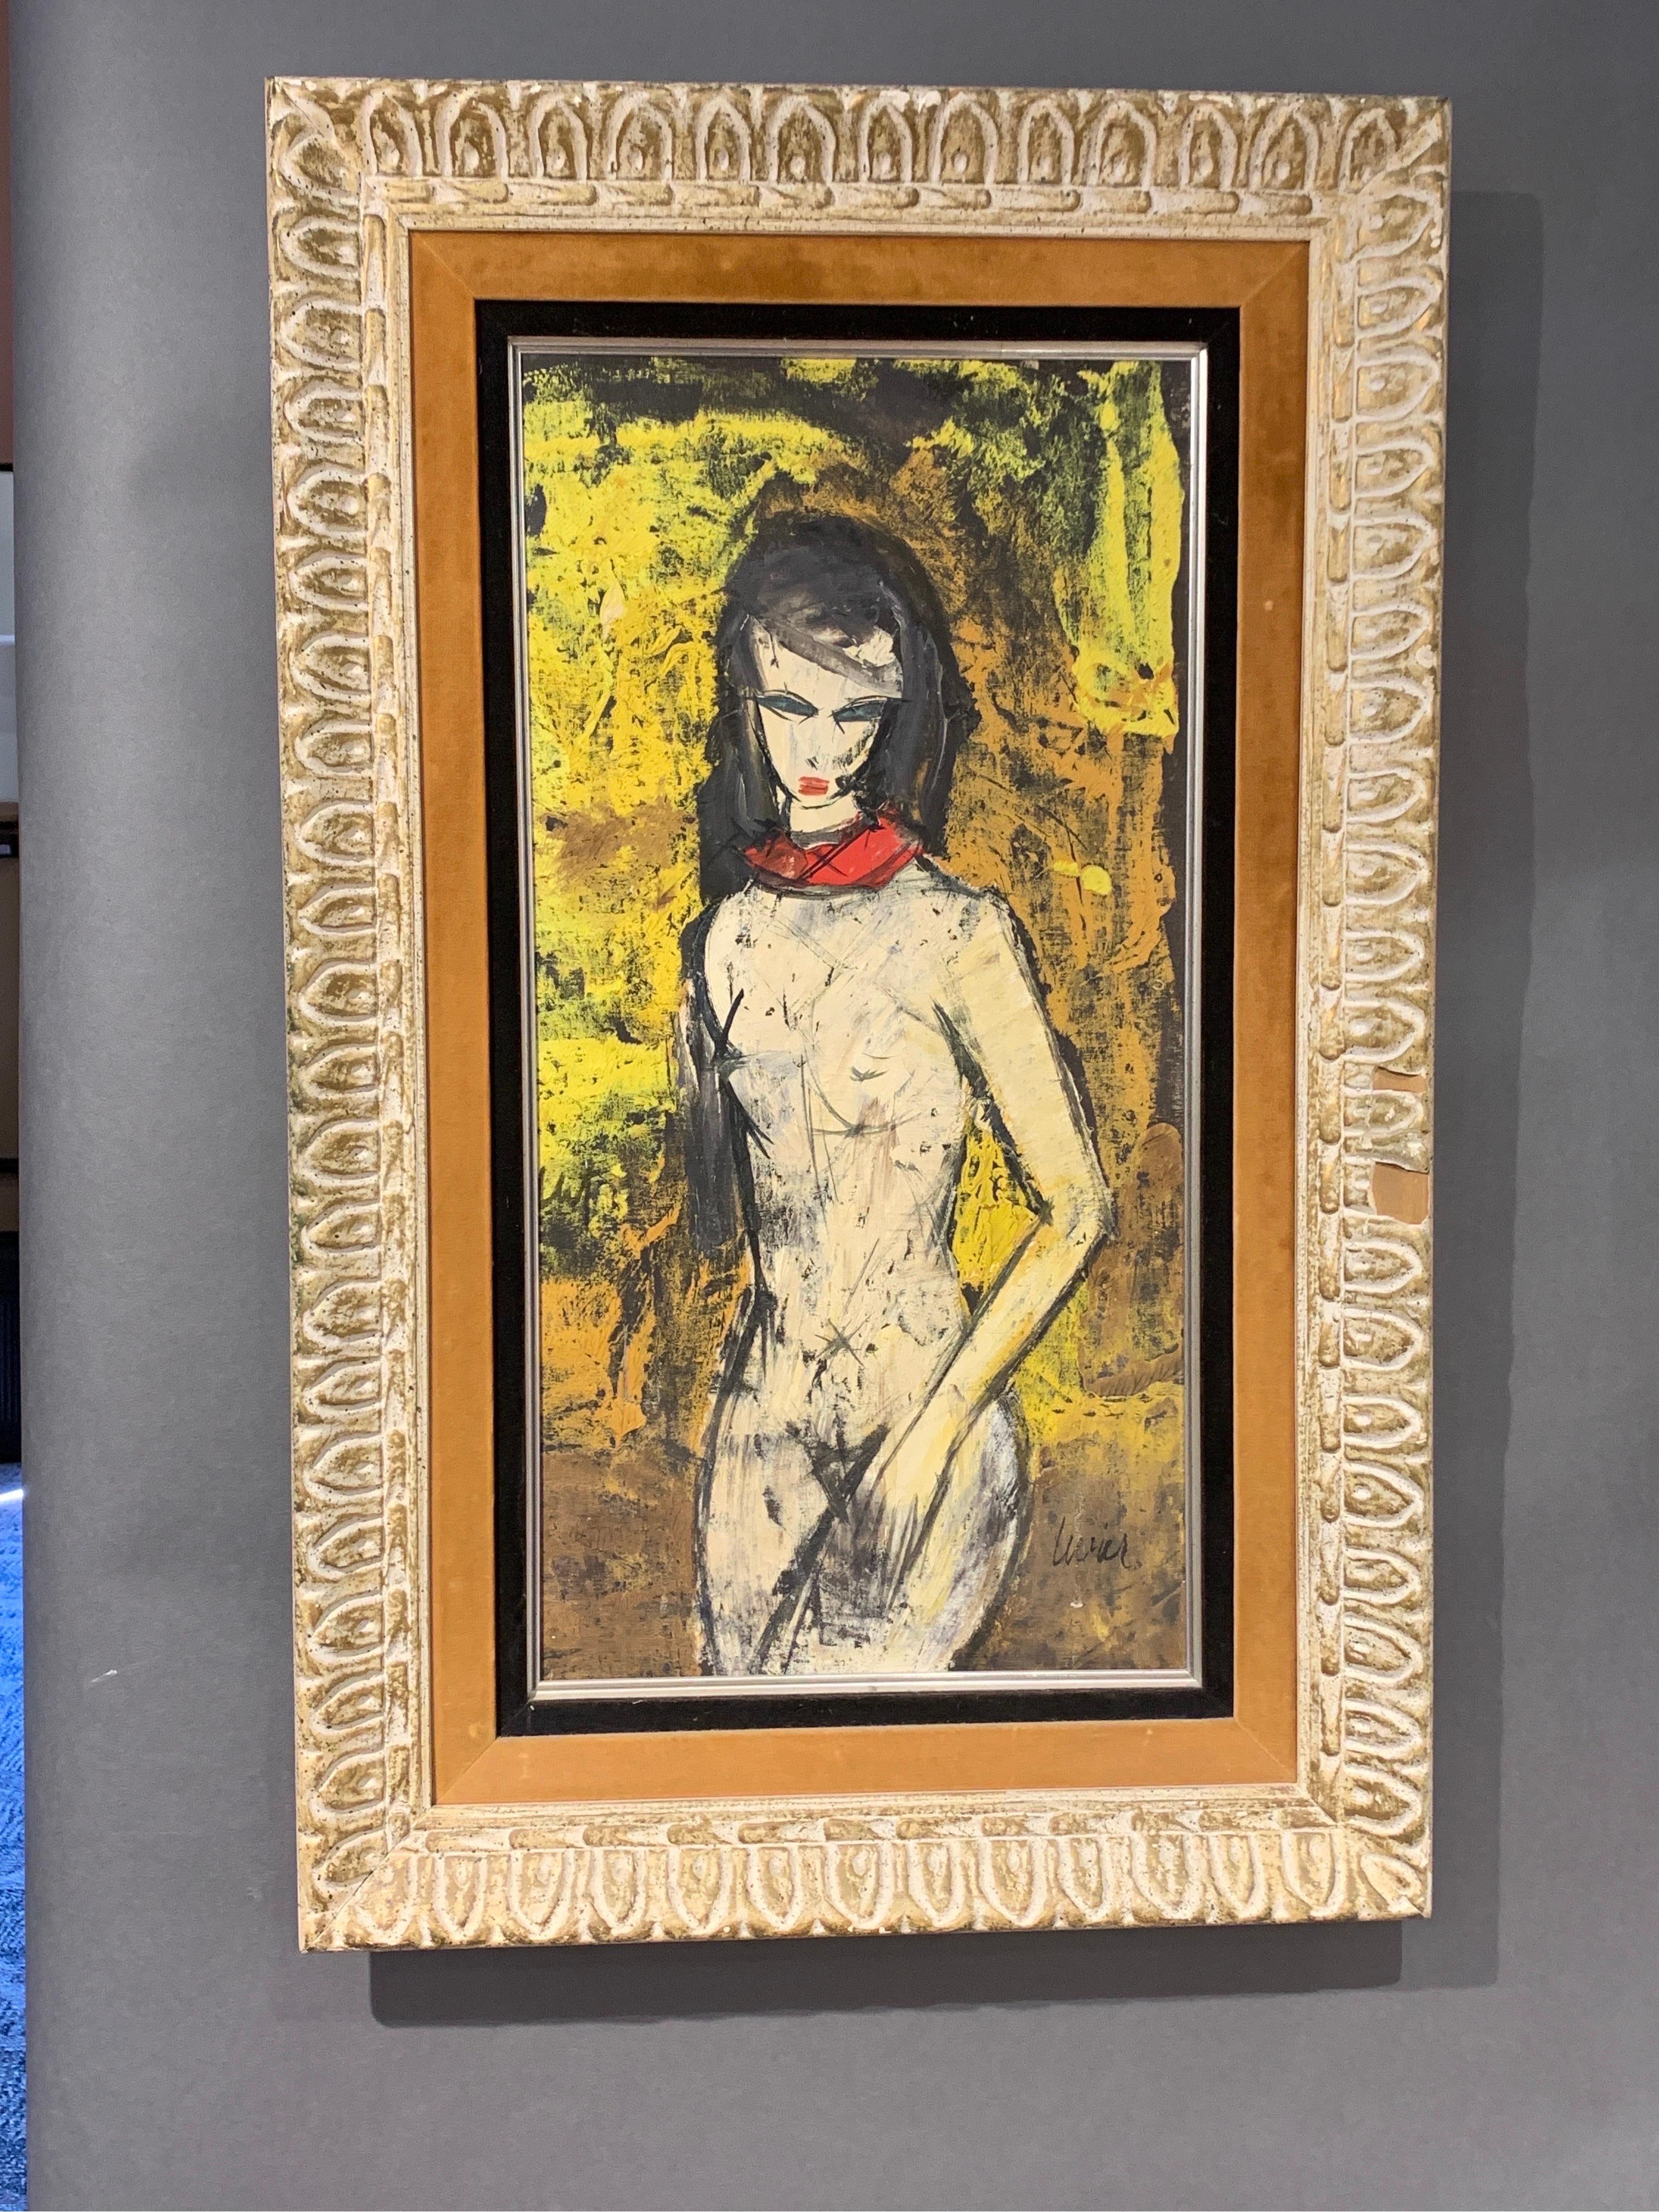 A rare female nude from famous artist Charles Levier. Mr. Levier’s work was collected by celebrities such as Frank Sinatra, Kirk Douglas, Elvis Presley, Peter Lawford and so many other Beverly Hills residents. This rare female nude painted in the